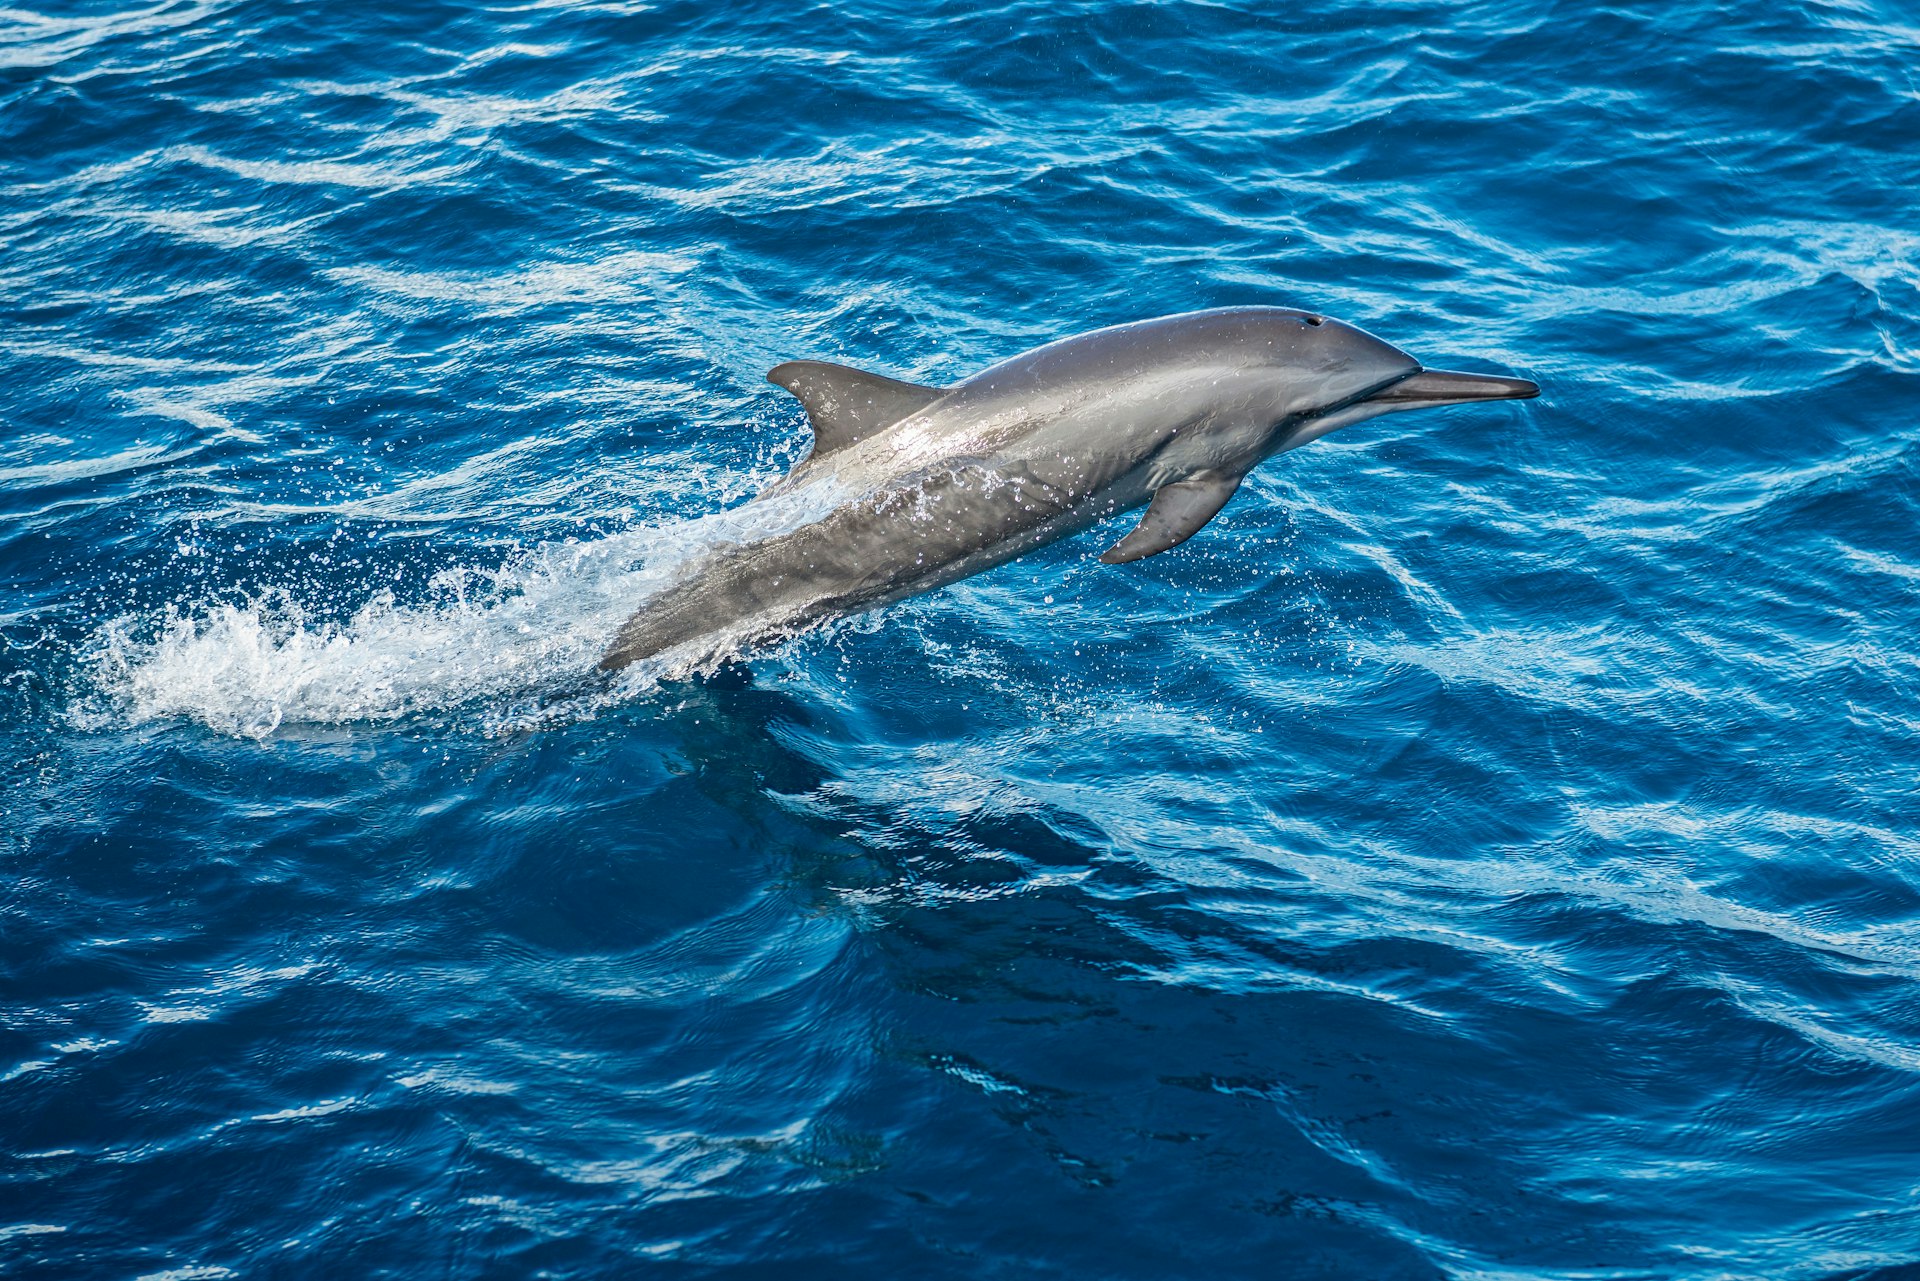 A spinner dolphin playing in the spray © Pete Atkinson / Getty Images